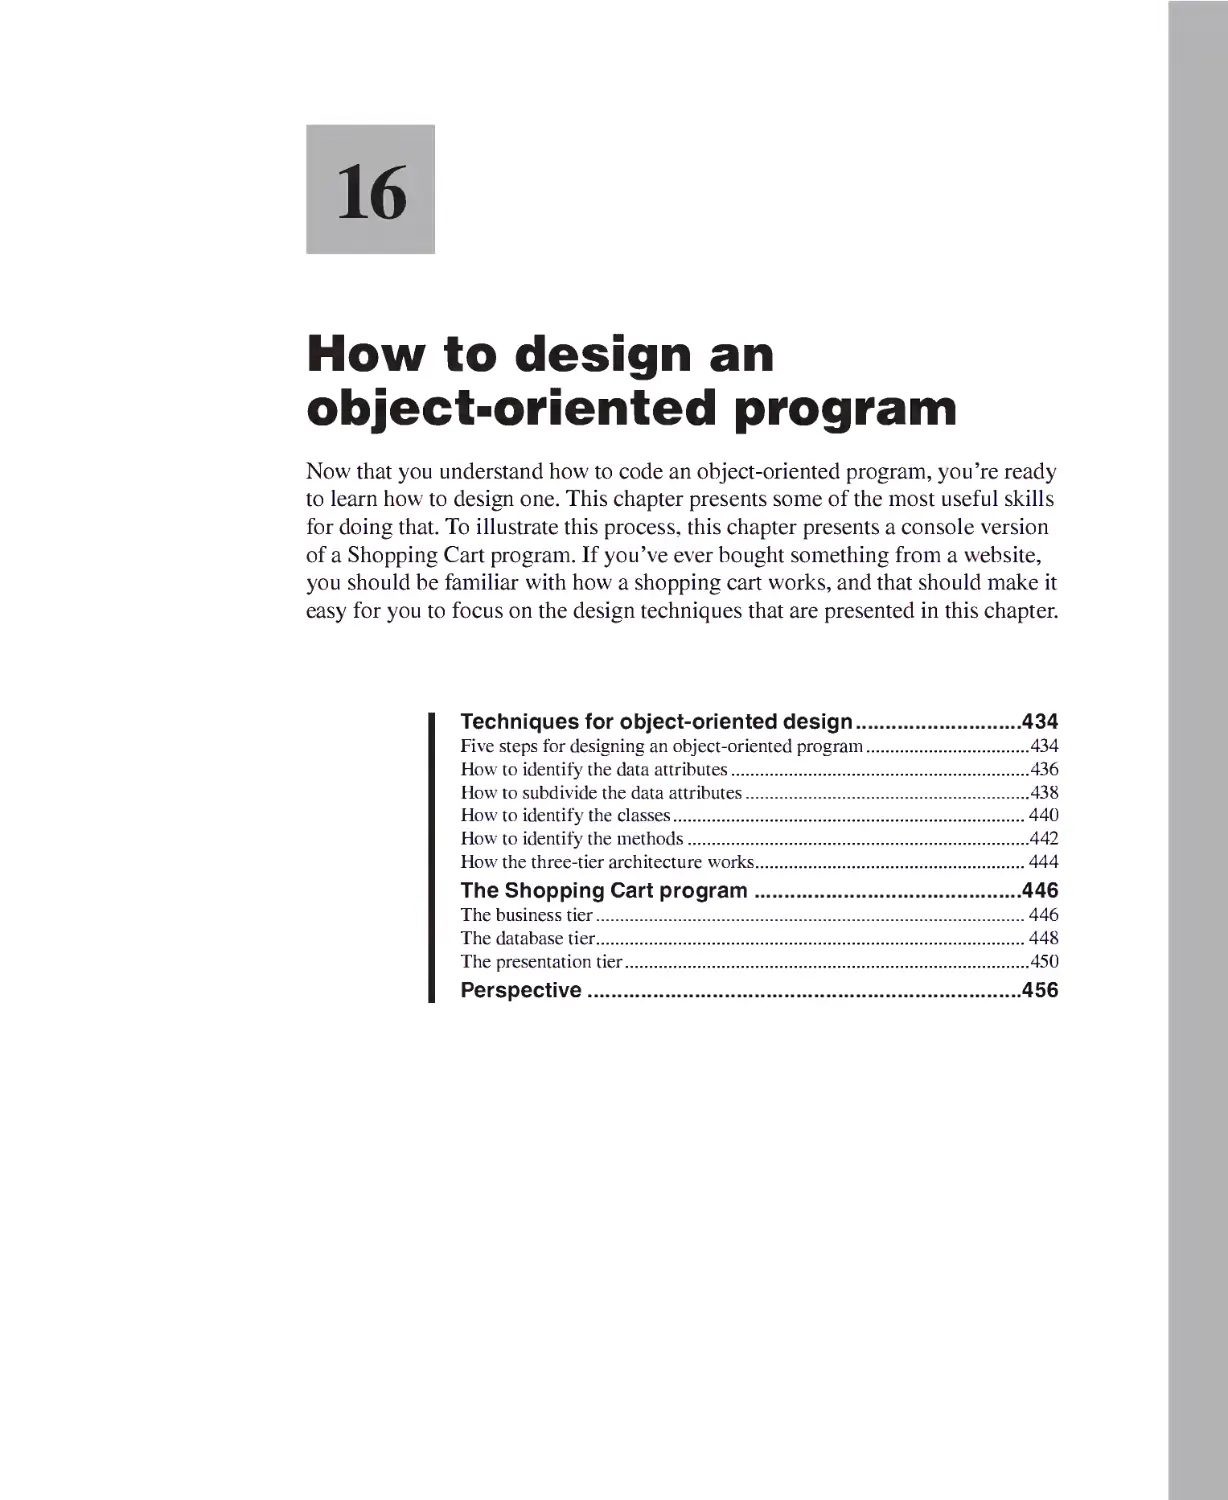 Chapter 16 - How to Design an Object-Oriented Program